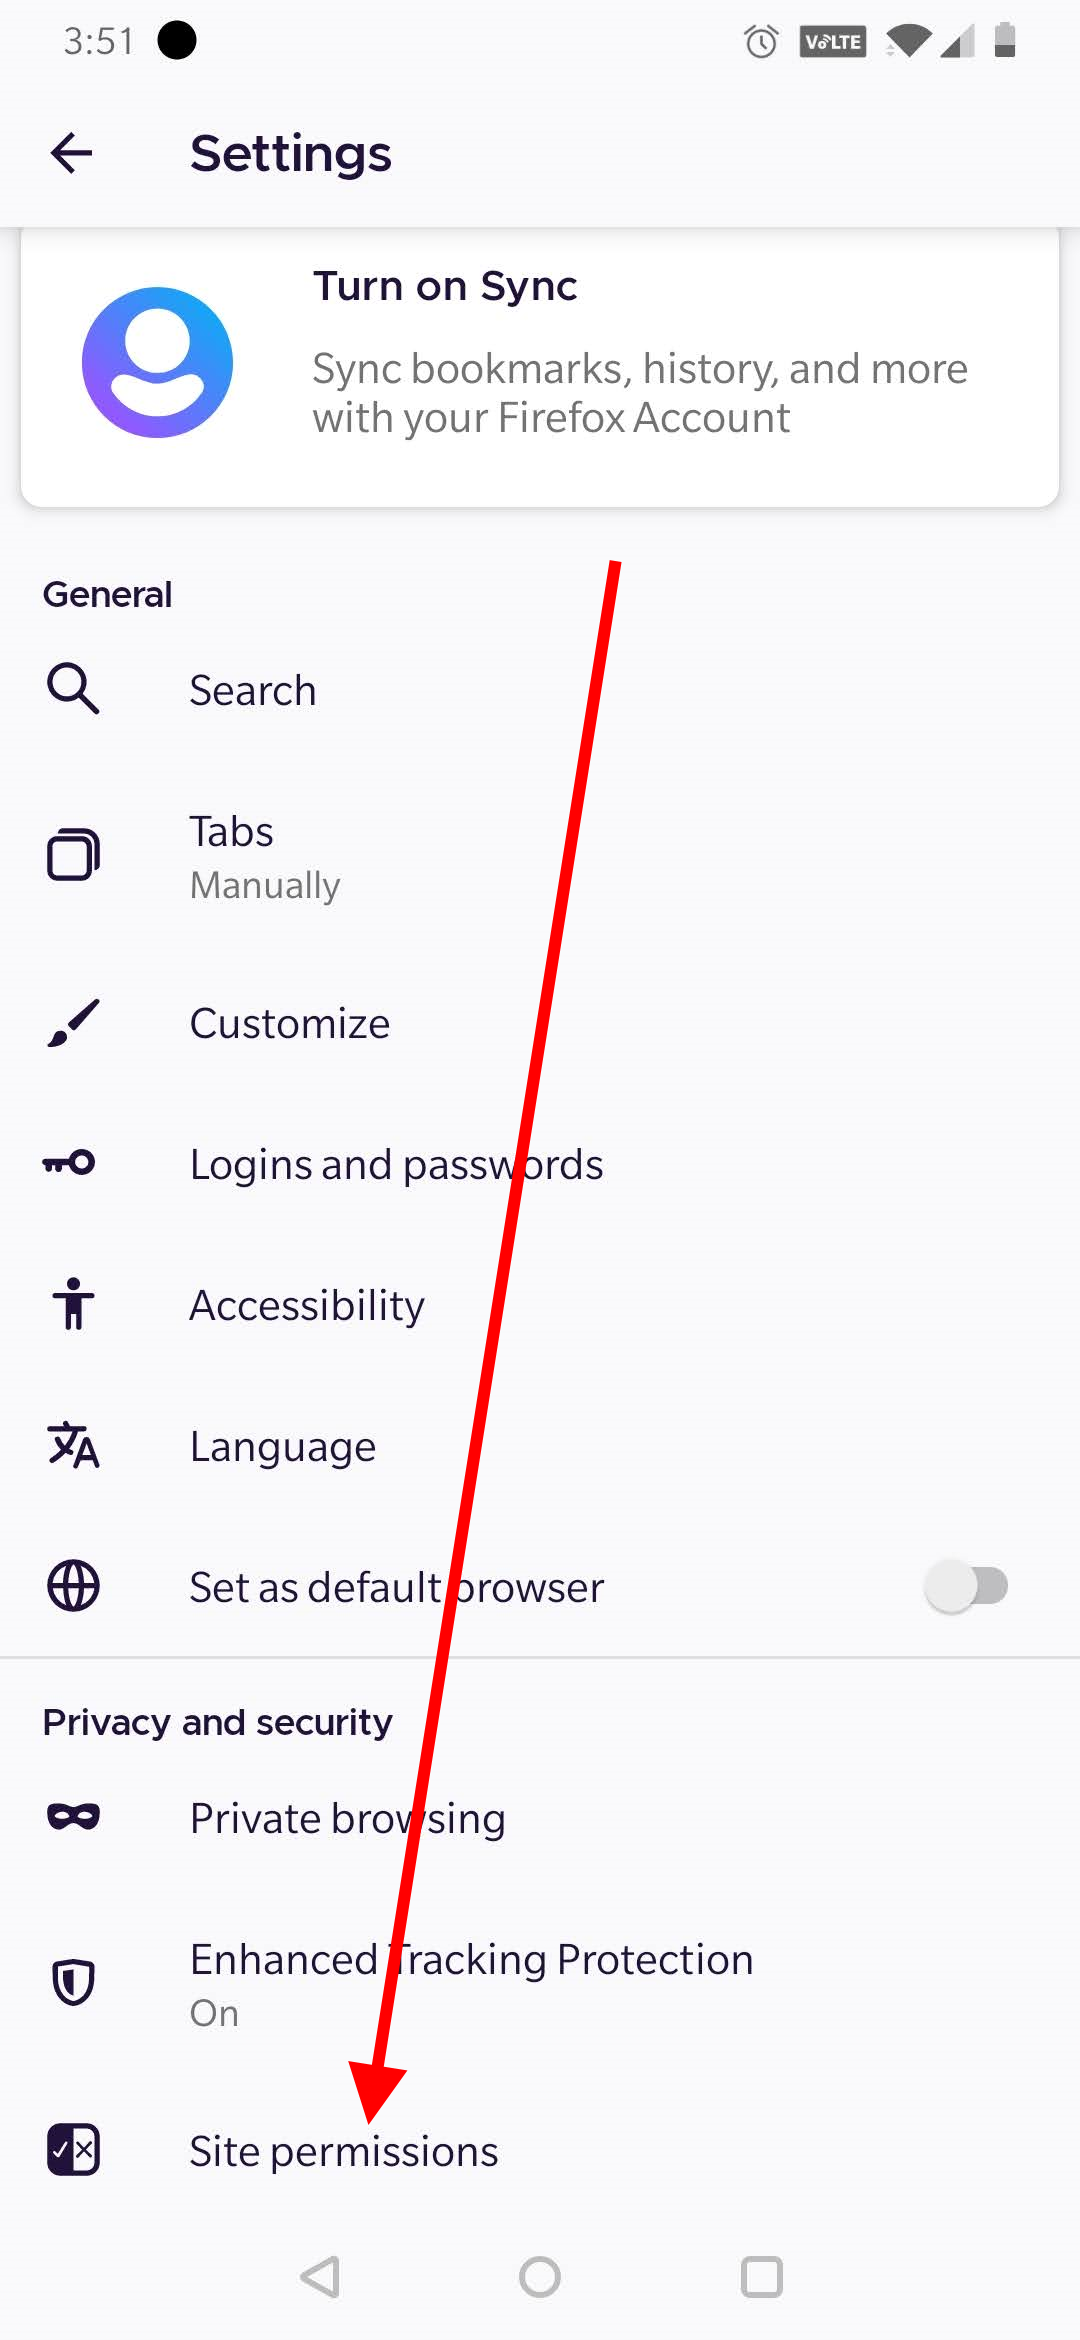 Arrow pointing at "Site permissions"